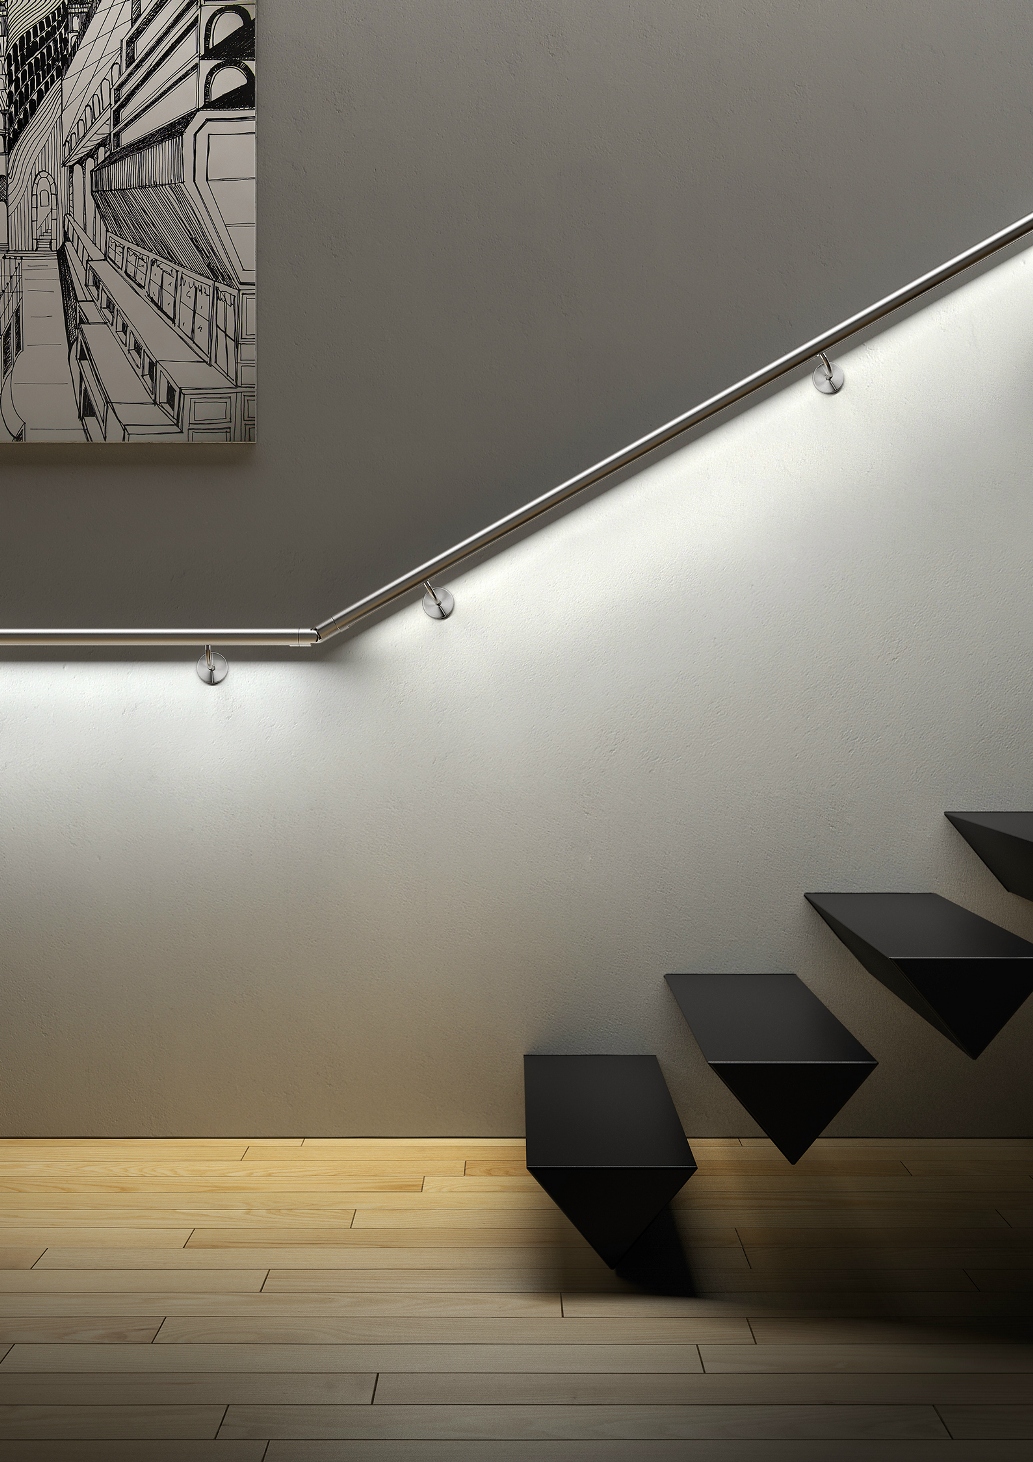 Led railing Stair Design Pictures